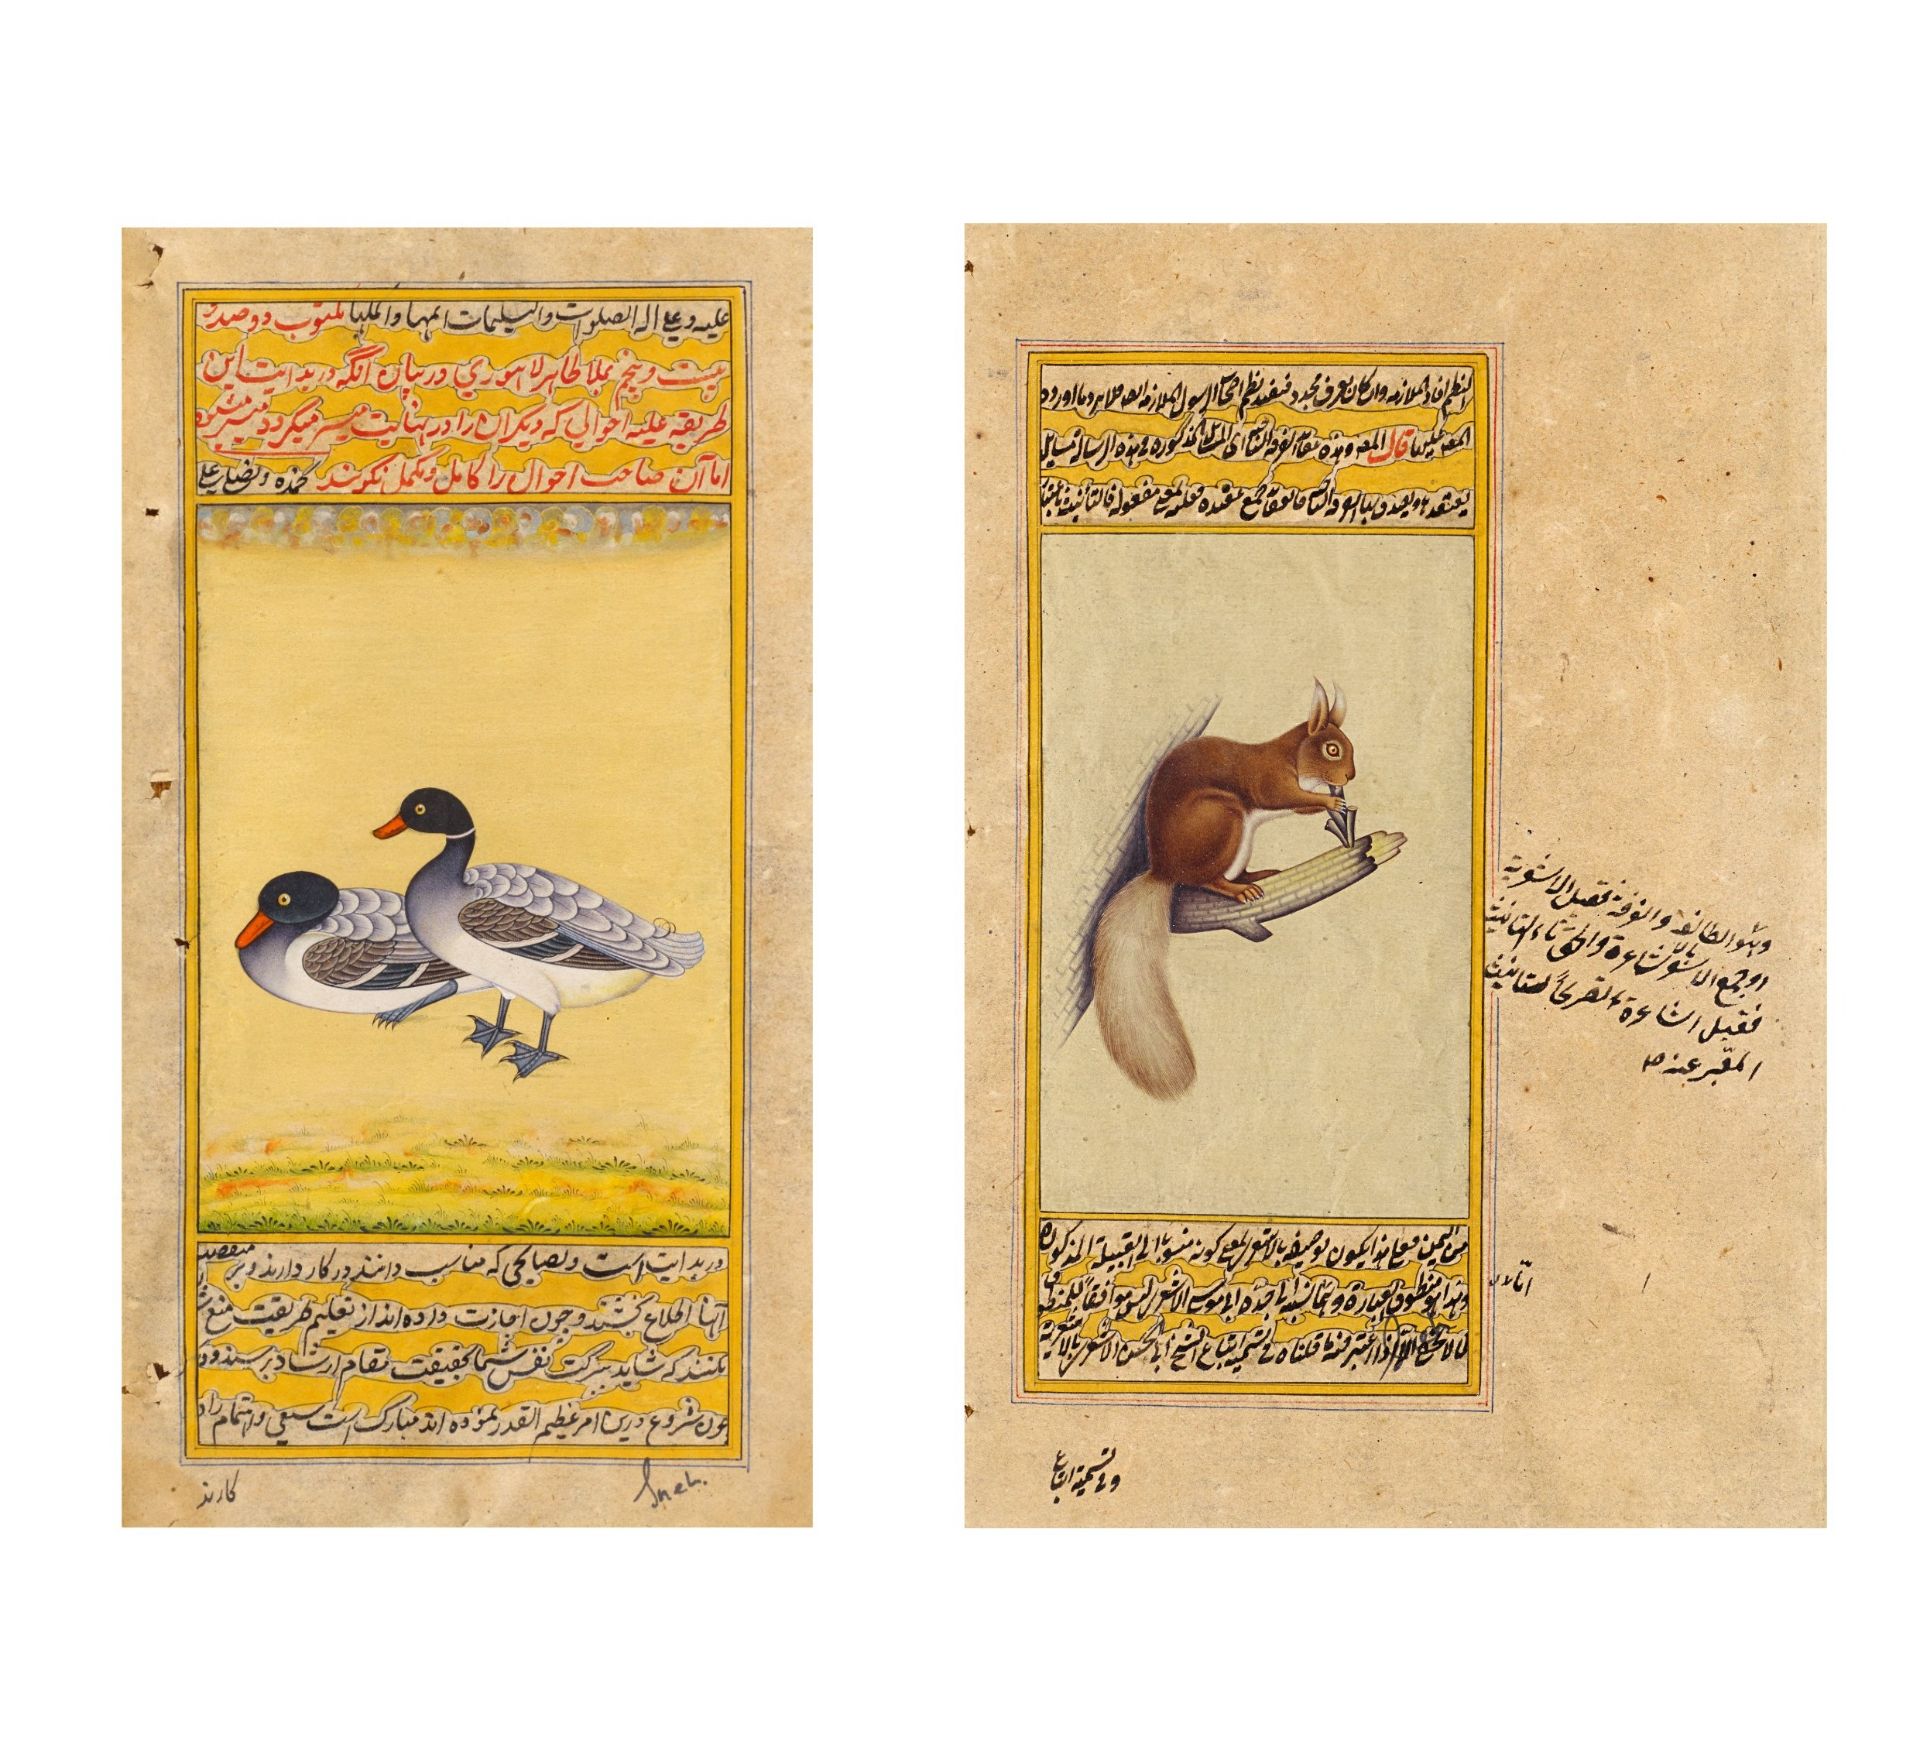 TWO MANUSCRIPT ILLUSTRATIONS OF DUCKS AND SQUIRREL. Indo Persian. 19th-20th c. Pigments on paper.